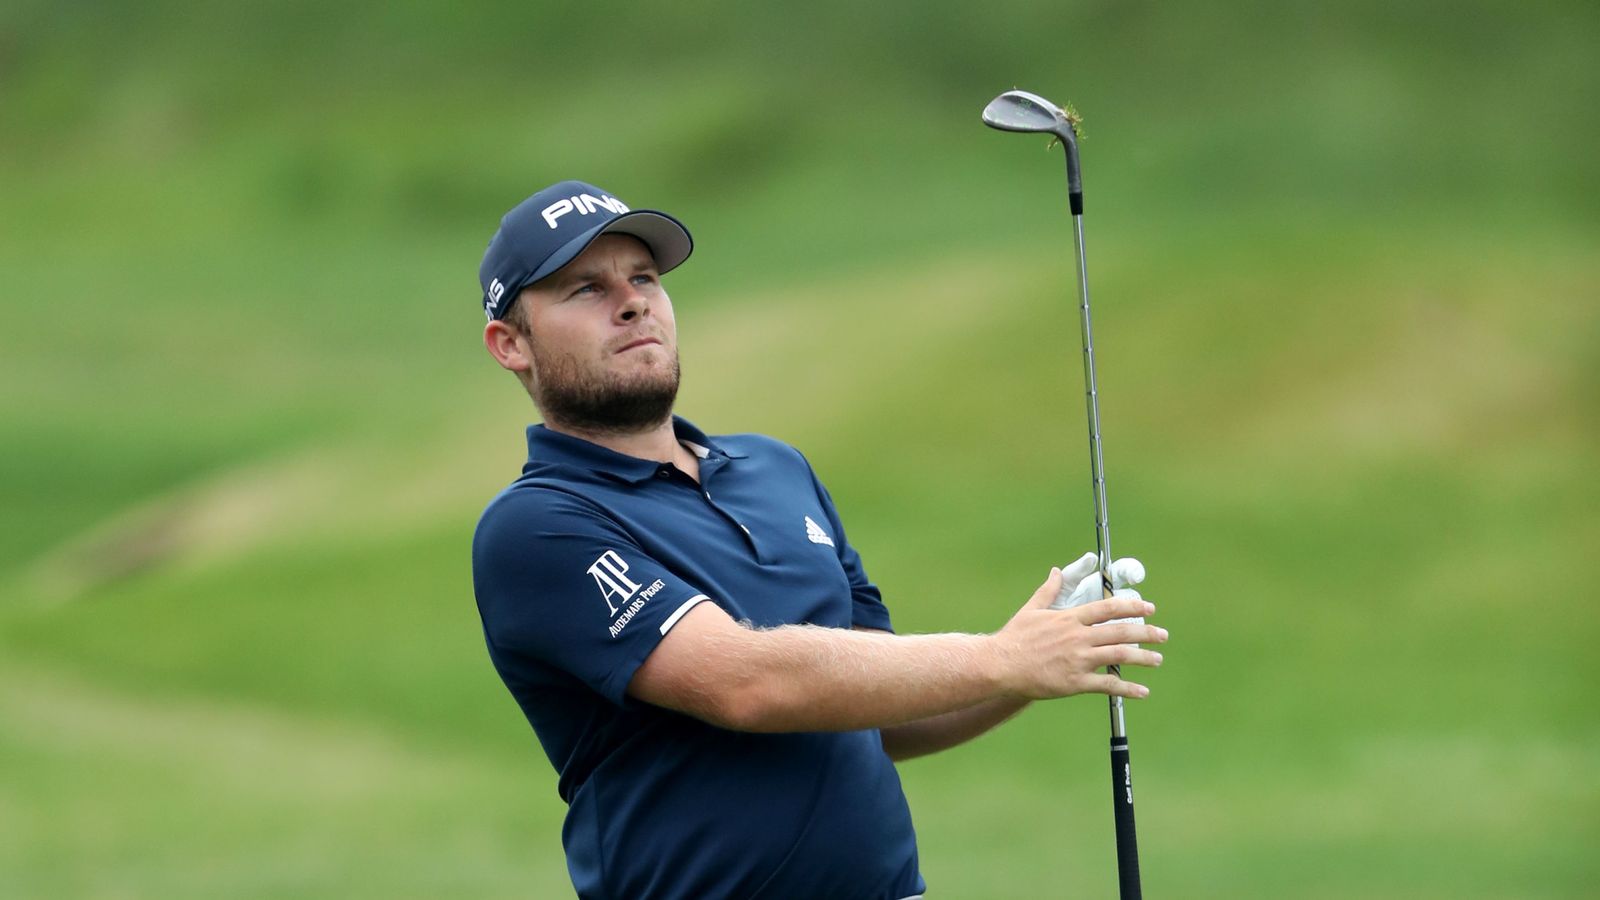 Tyrrell Hatton Goes 77-67, Makes The Cut At Bay Hill